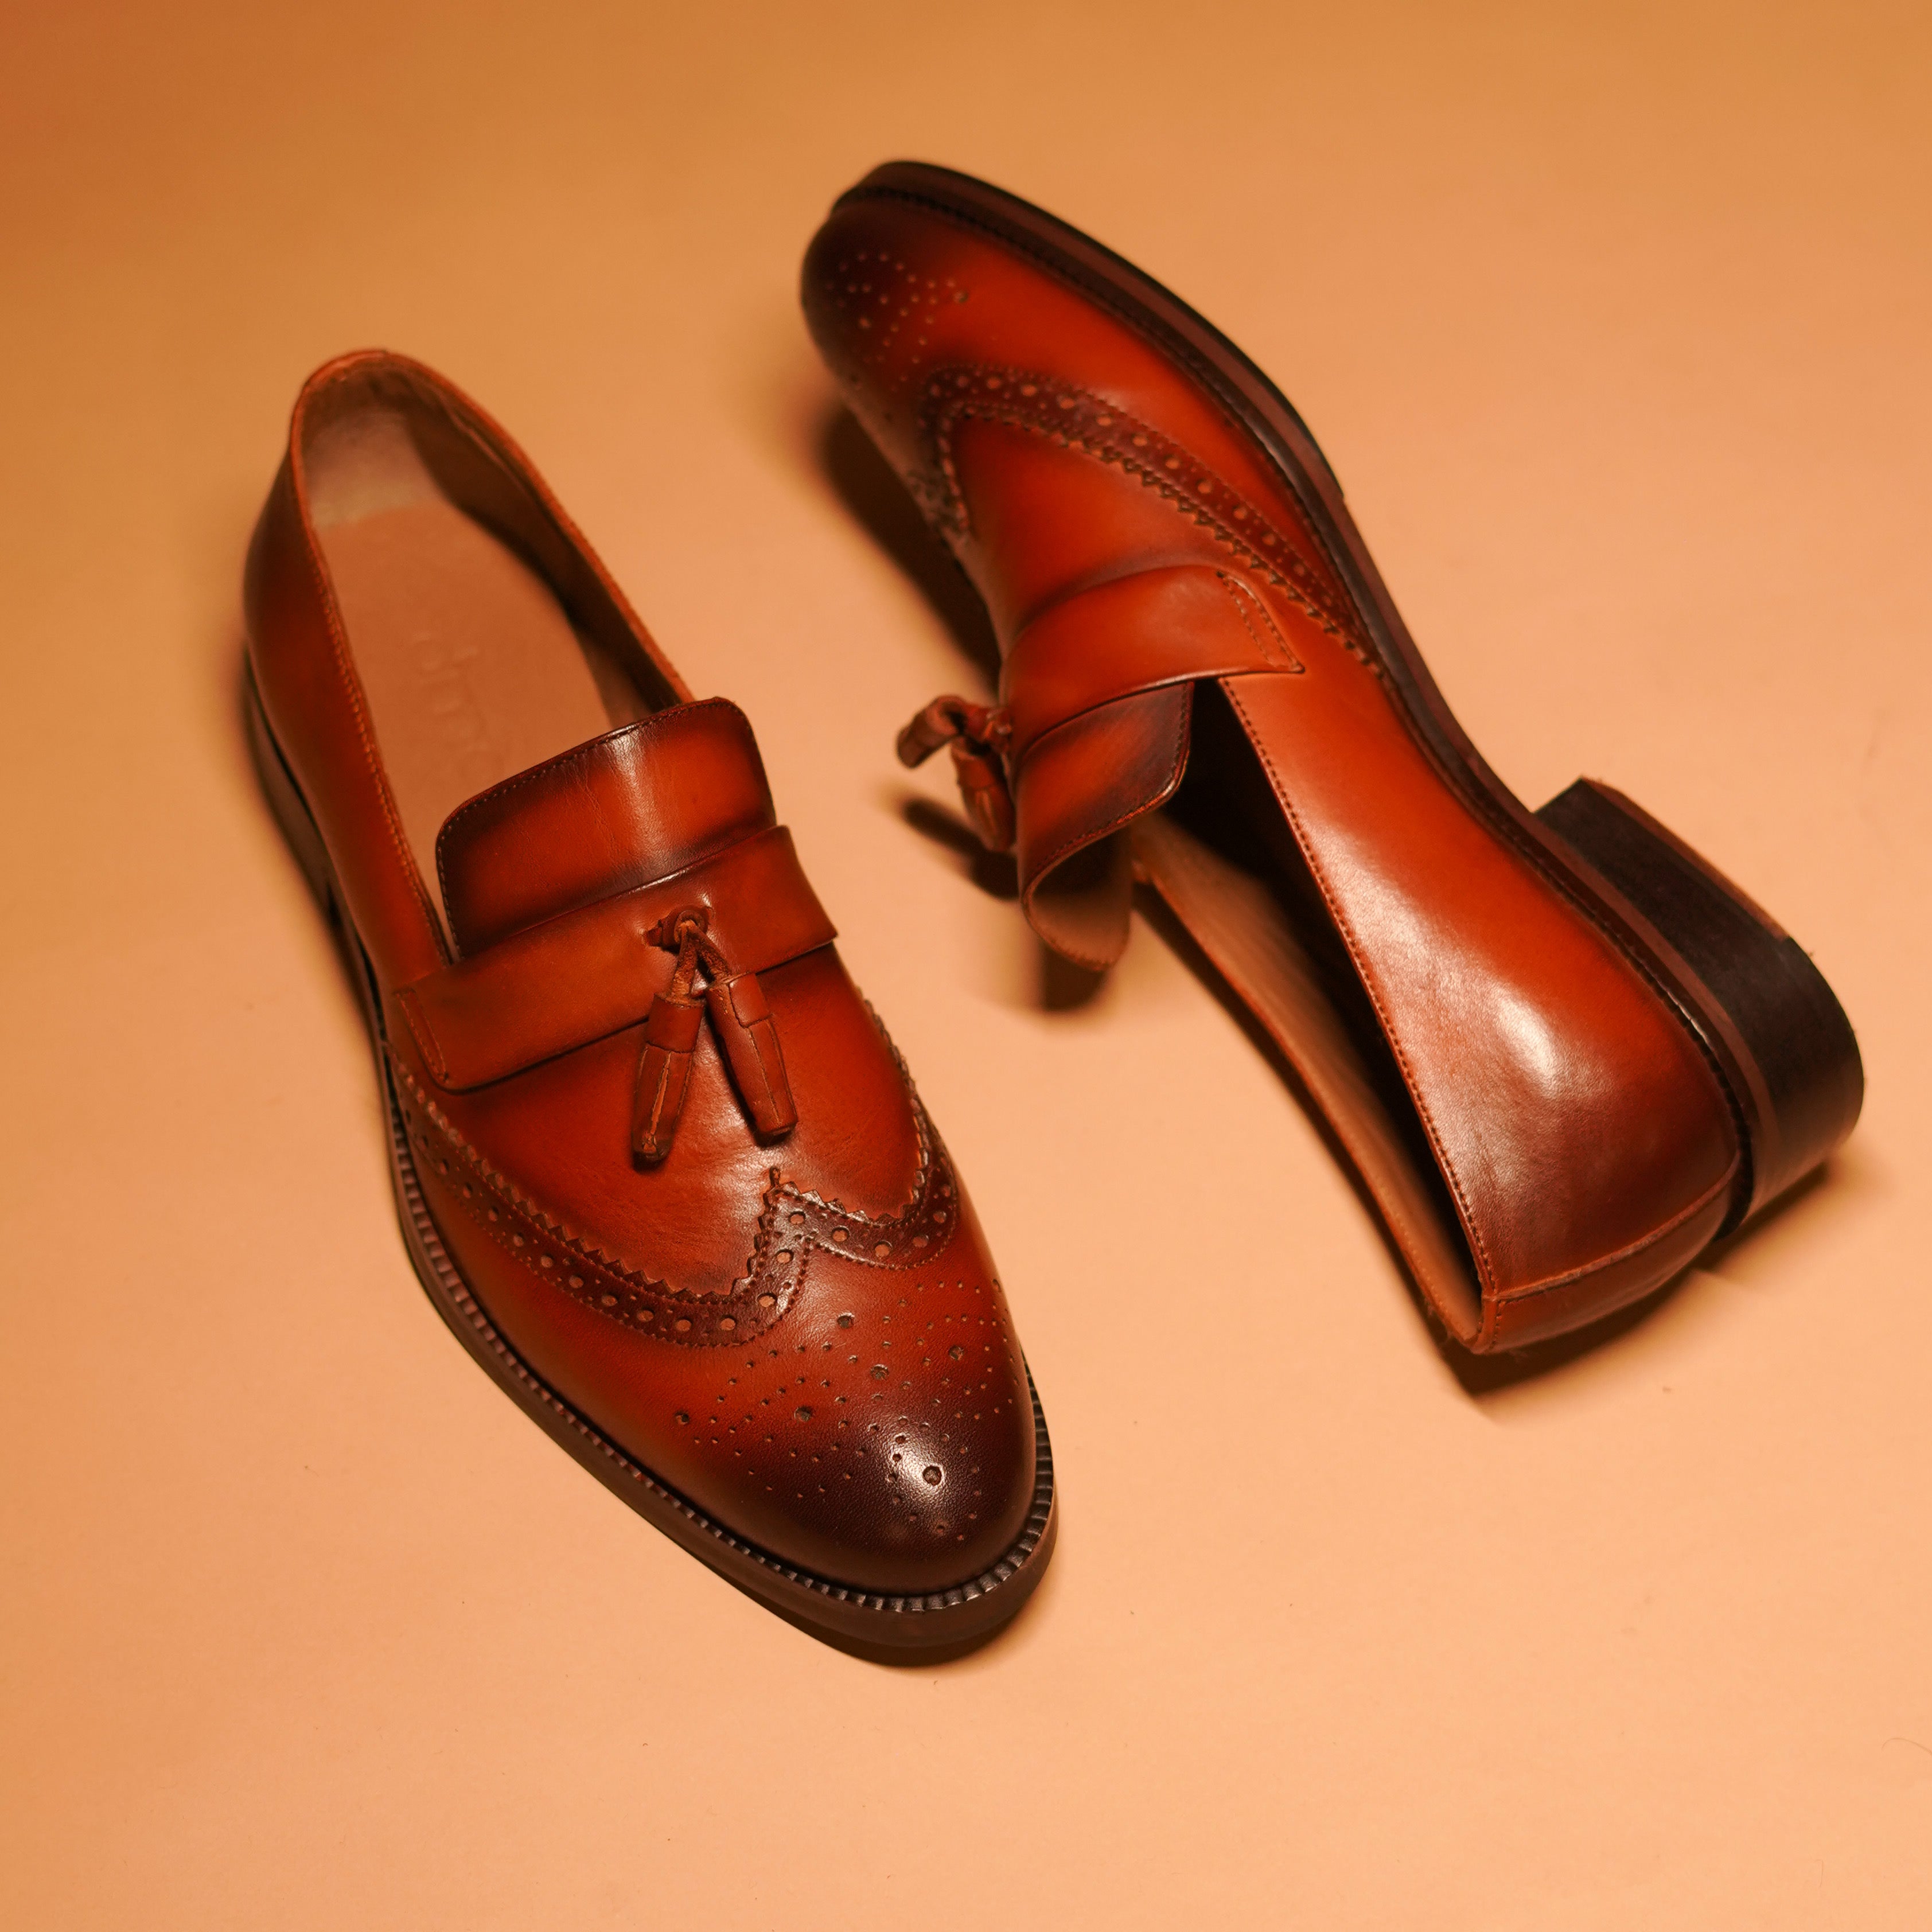 Detailed craftsmanship on Motivo Broguo with full wingtip brogue pattern and luxurious tassel.